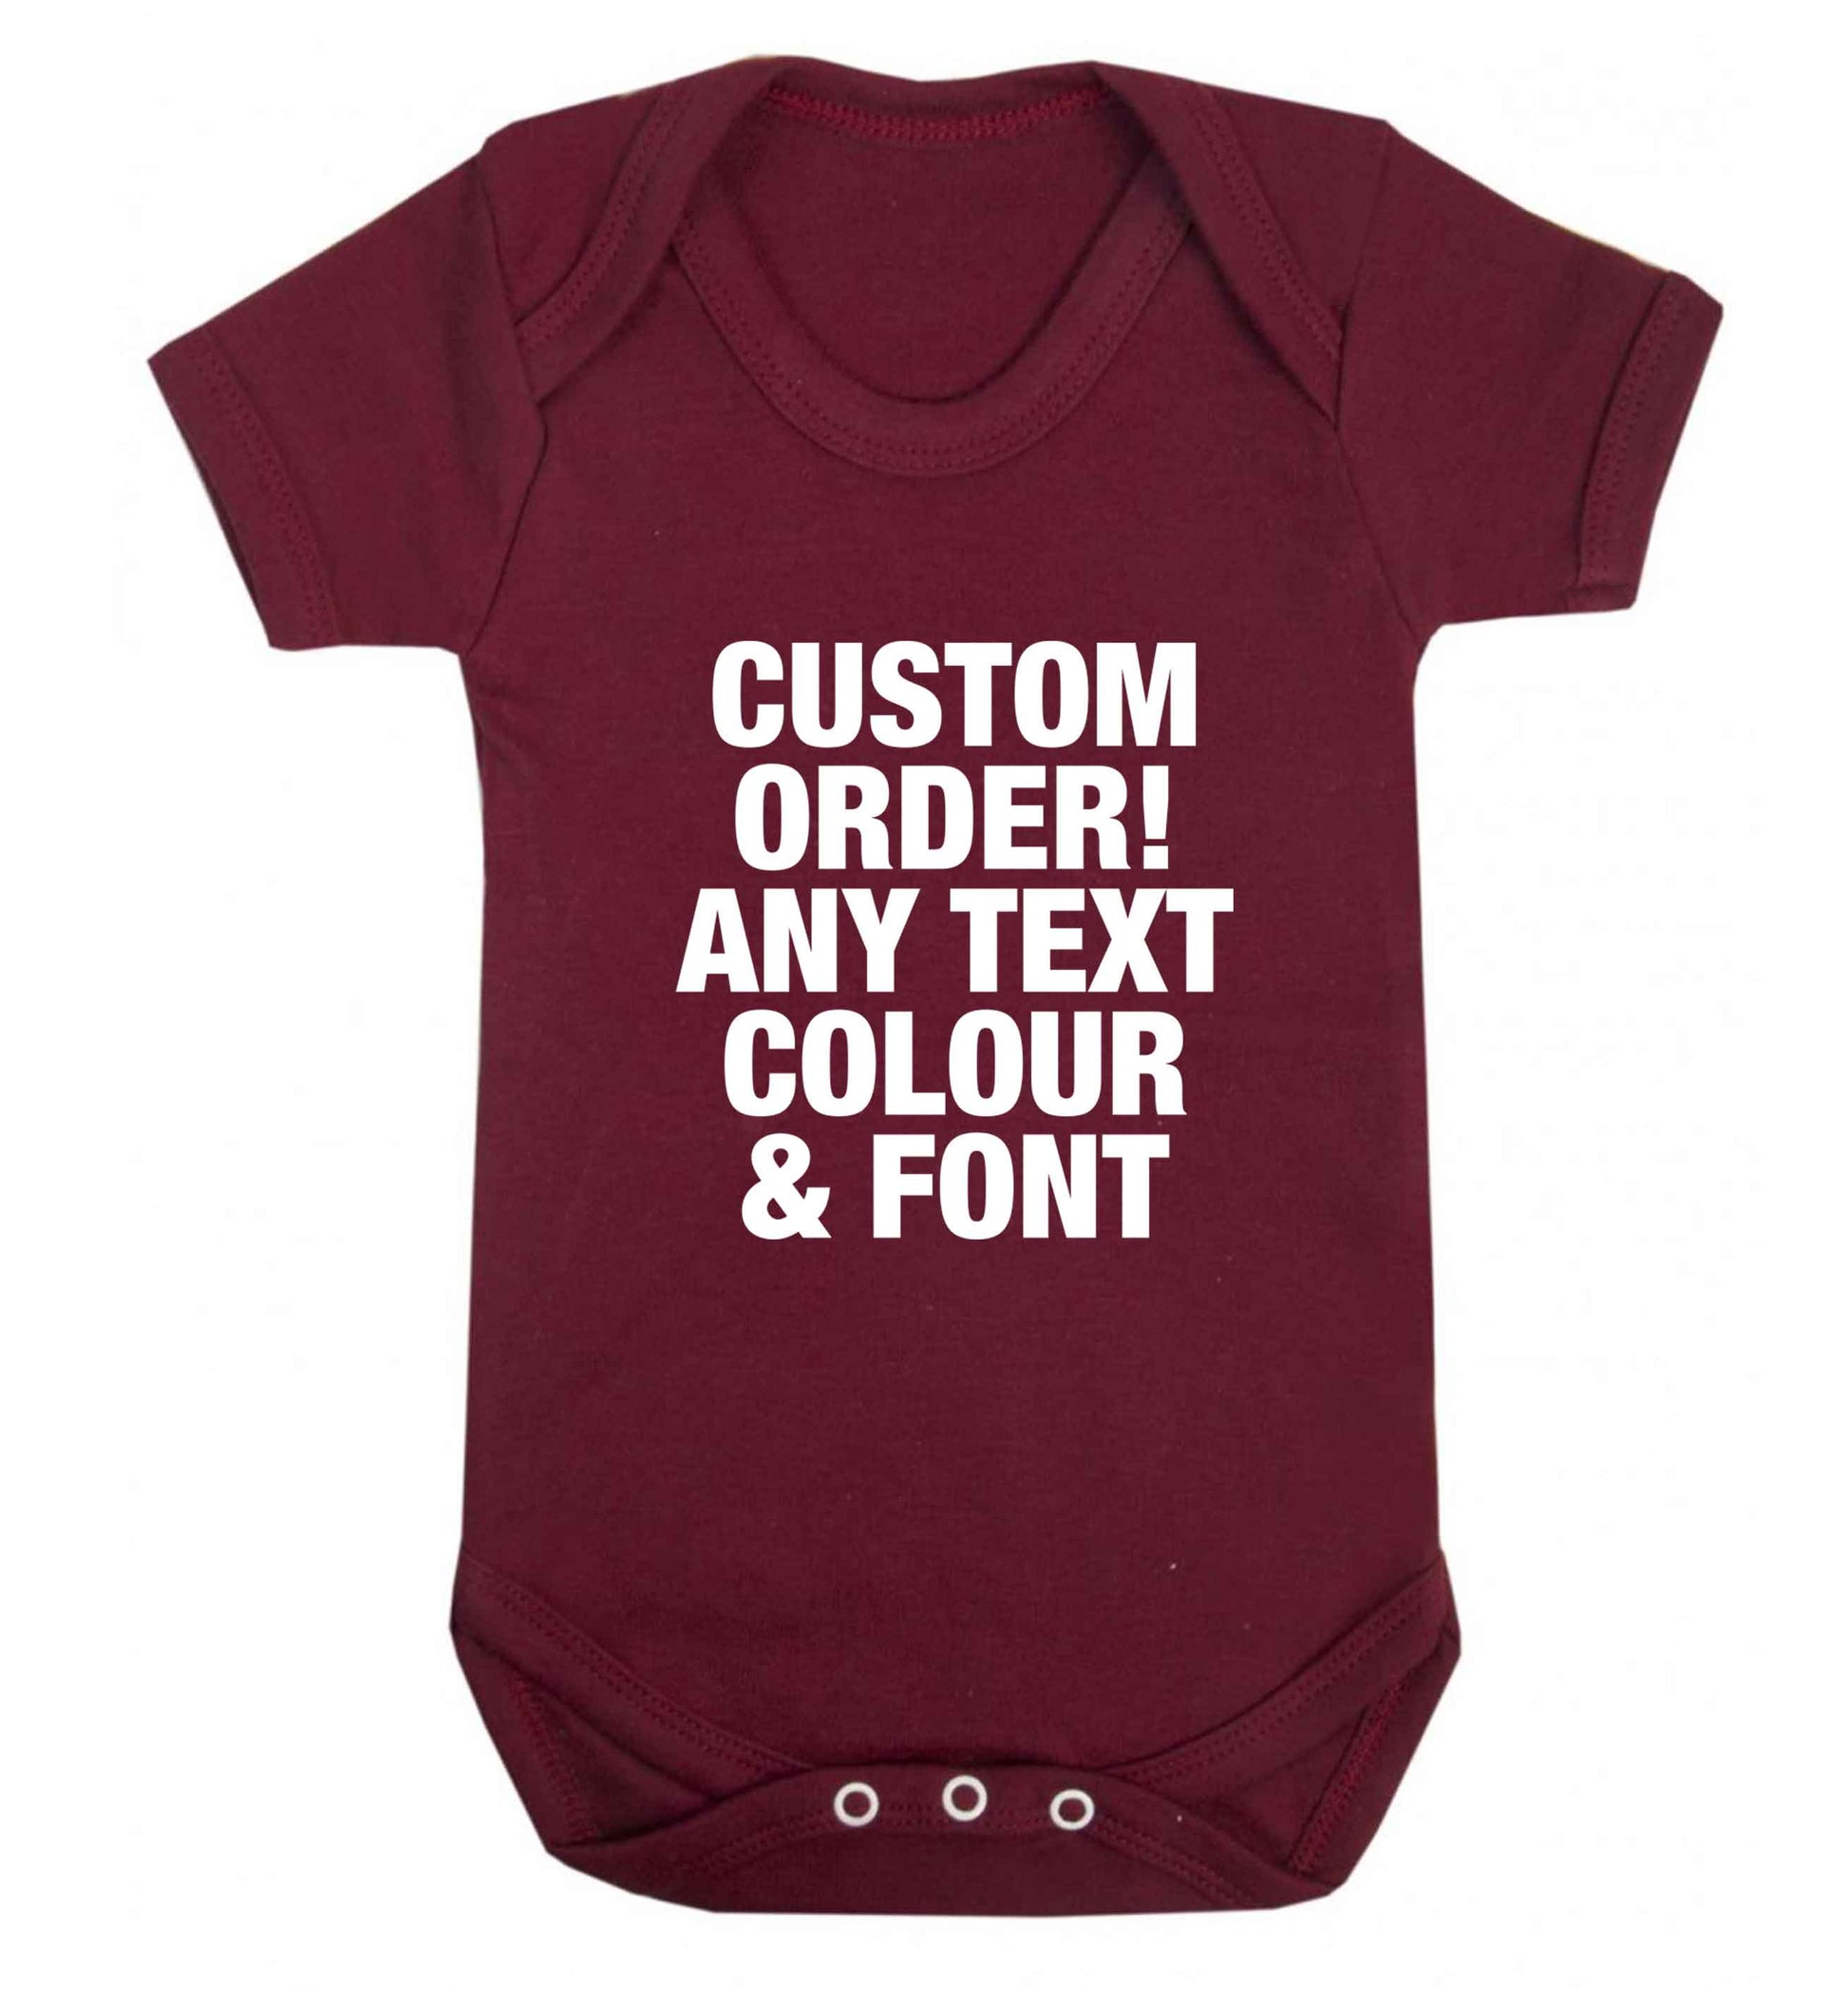 Custom order any text colour and font baby vest maroon 18-24 months